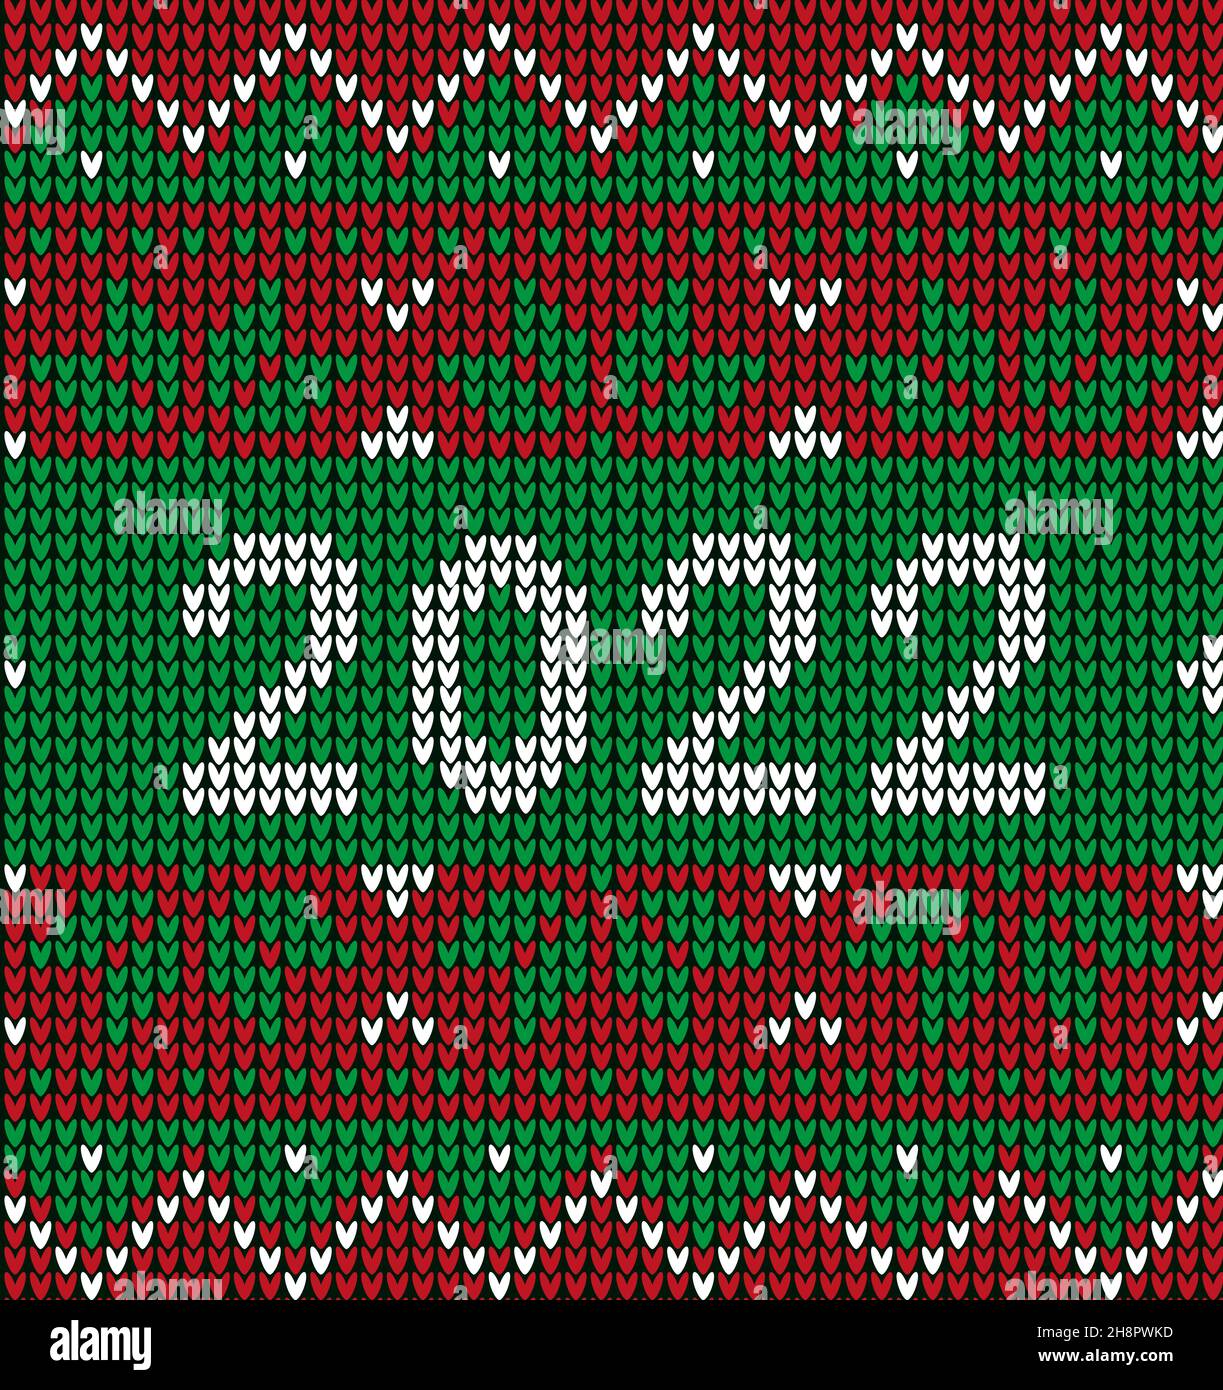 New Year Seamless Knitted Pattern with number 2022. Knitting Sweater Design. Wool Knitted Texture. Vector illustration Stock Vector